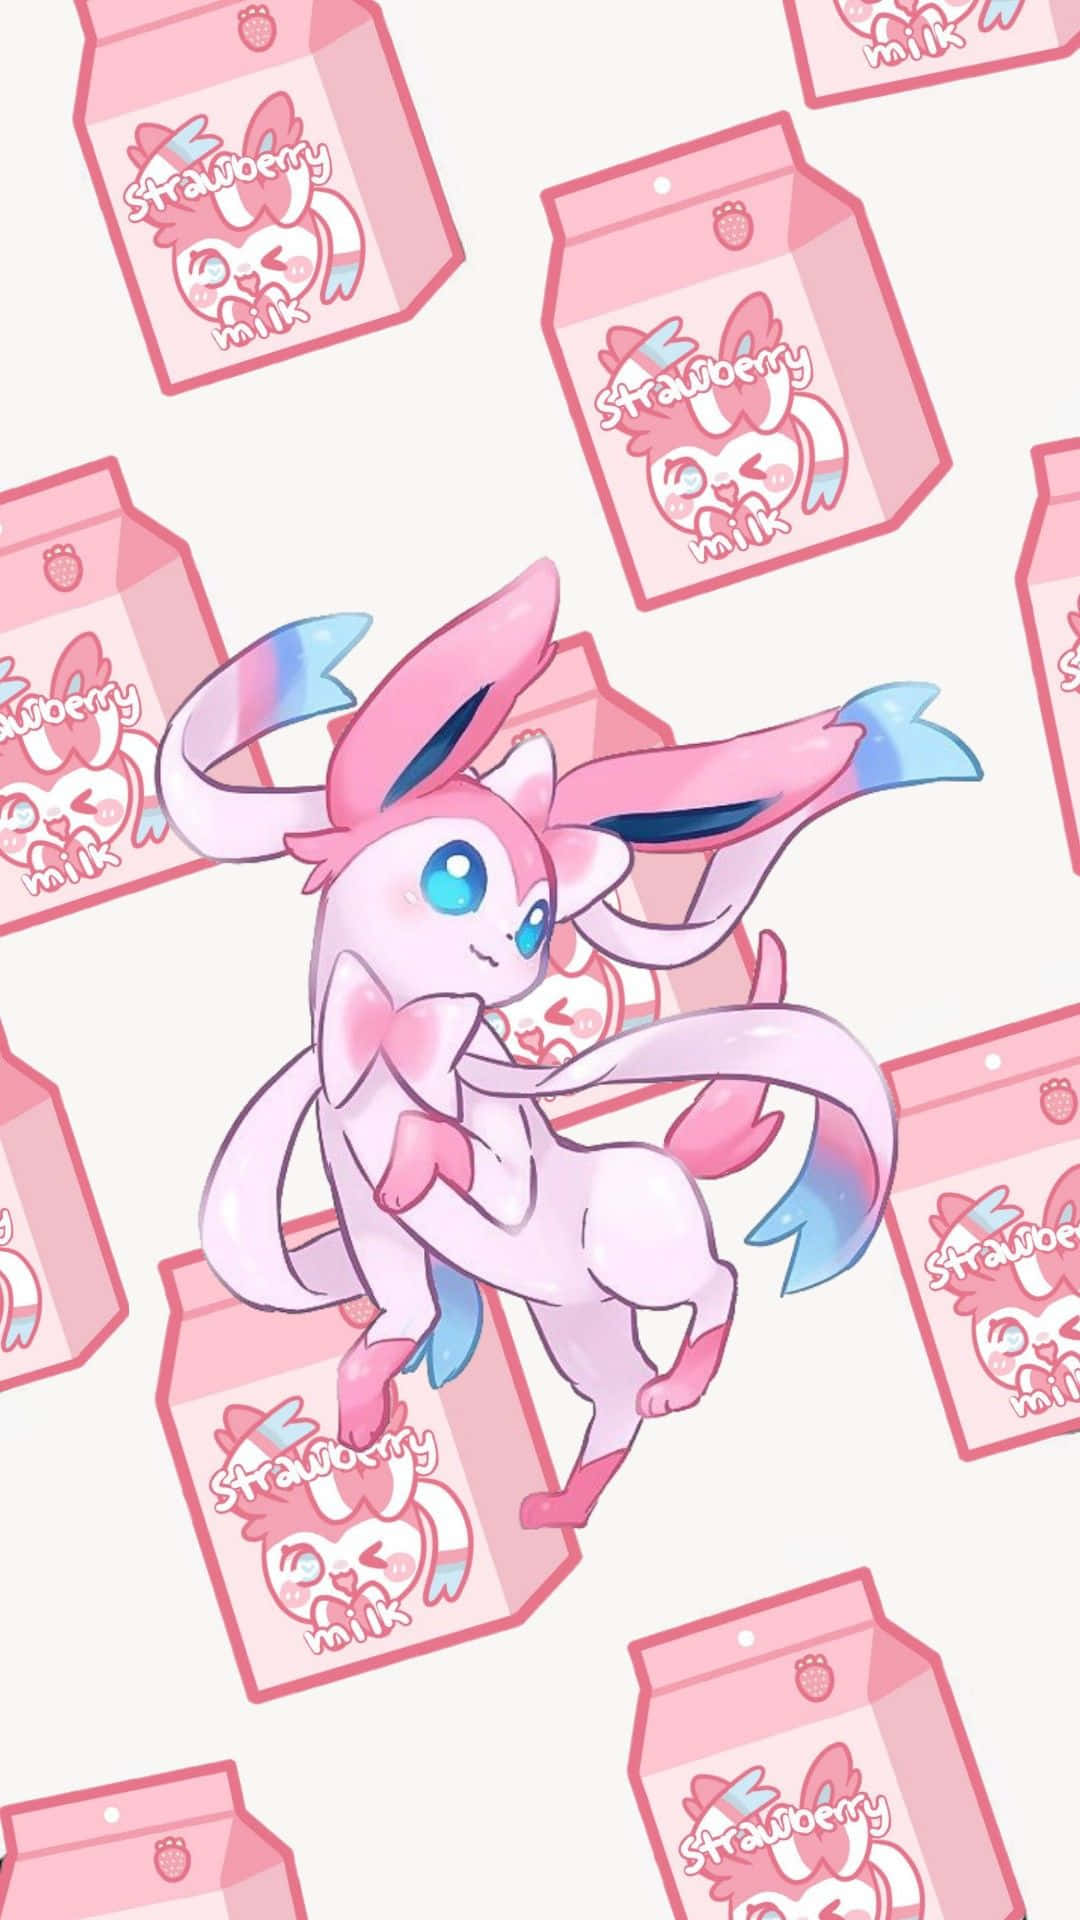 A cute and mischievous Sylveon looks on with a smile. Wallpaper